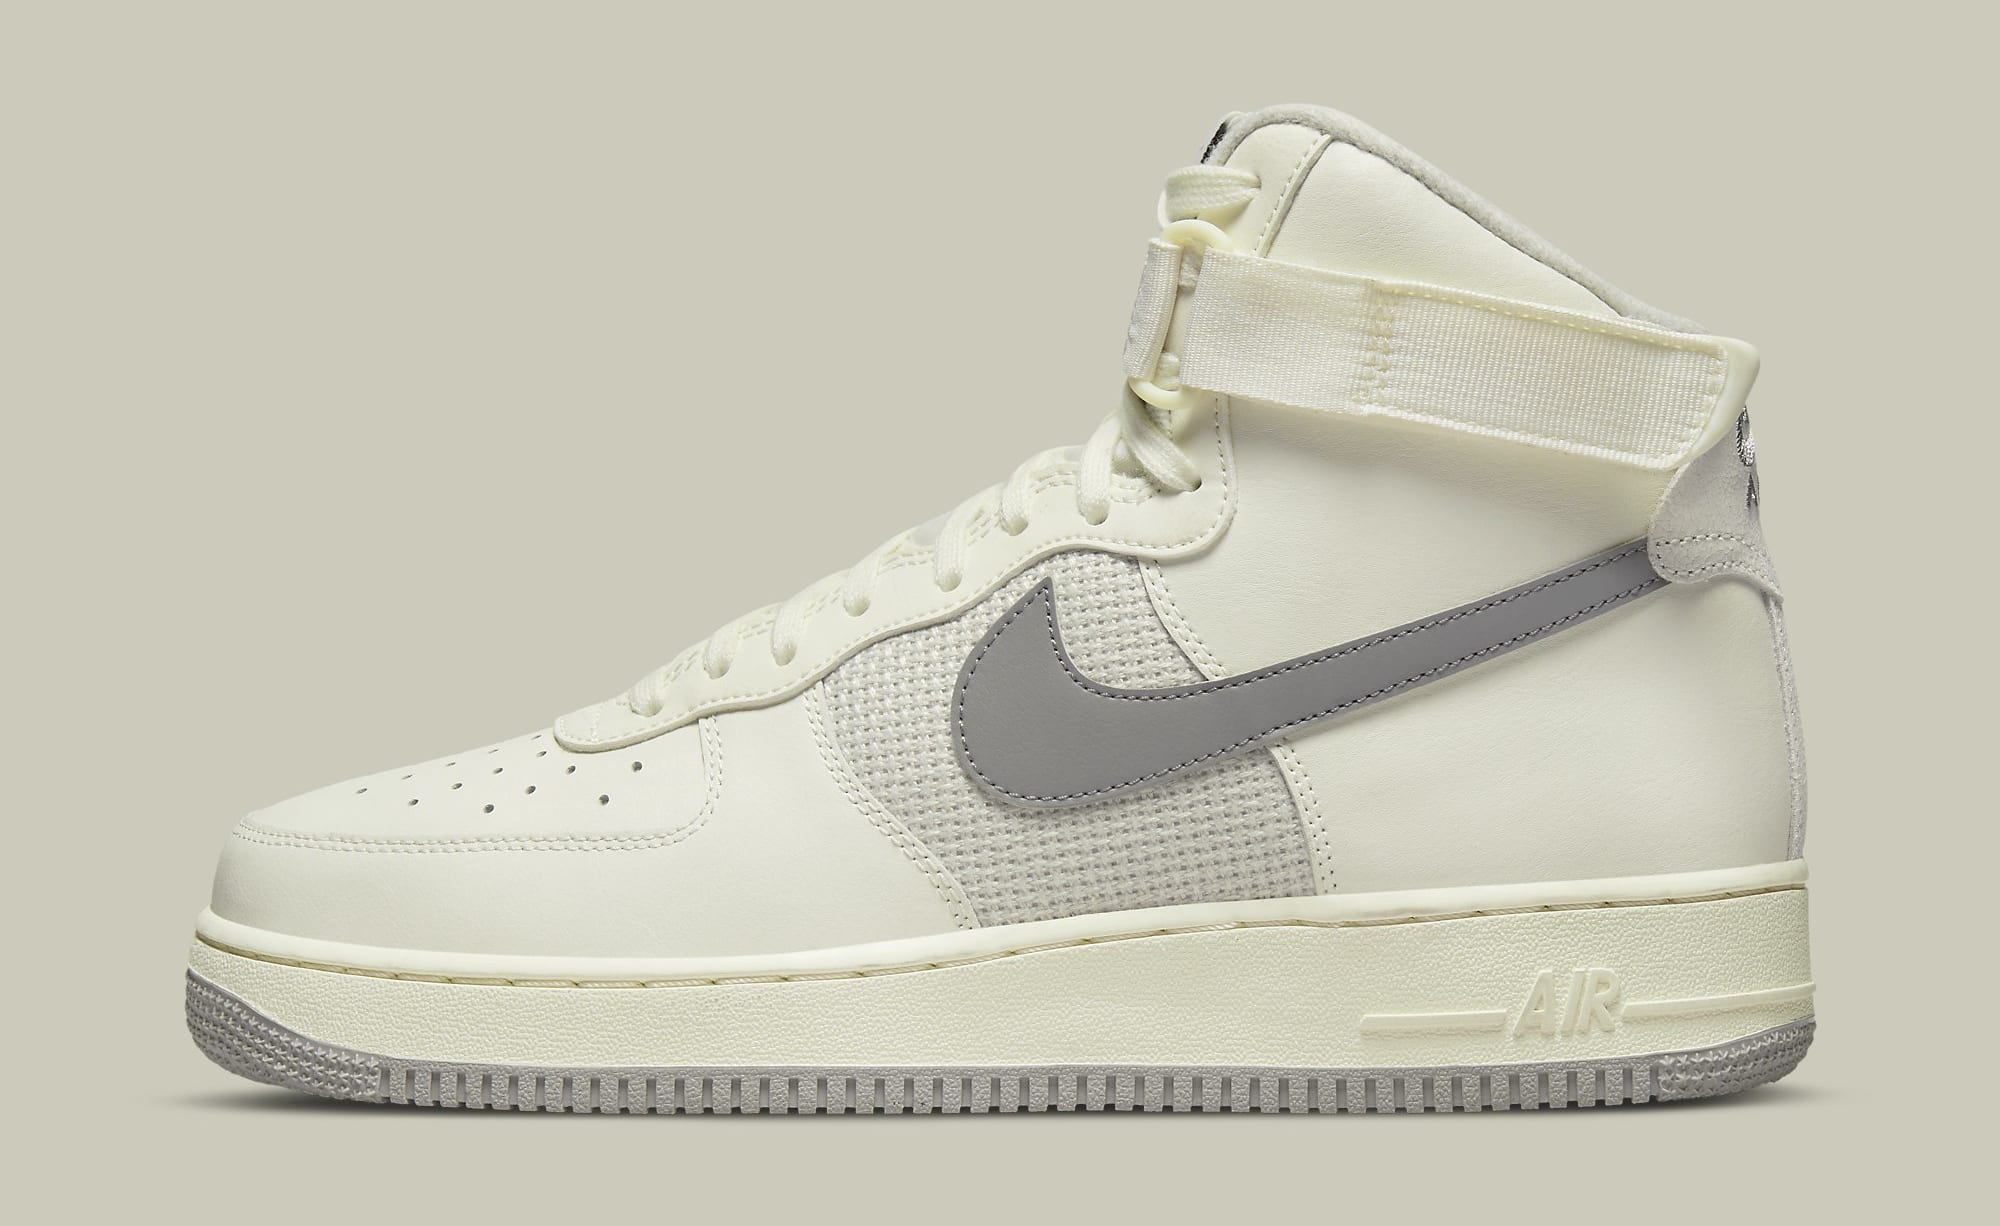 This OG-Styled Nike Air Force 1 High Is Dropping in July